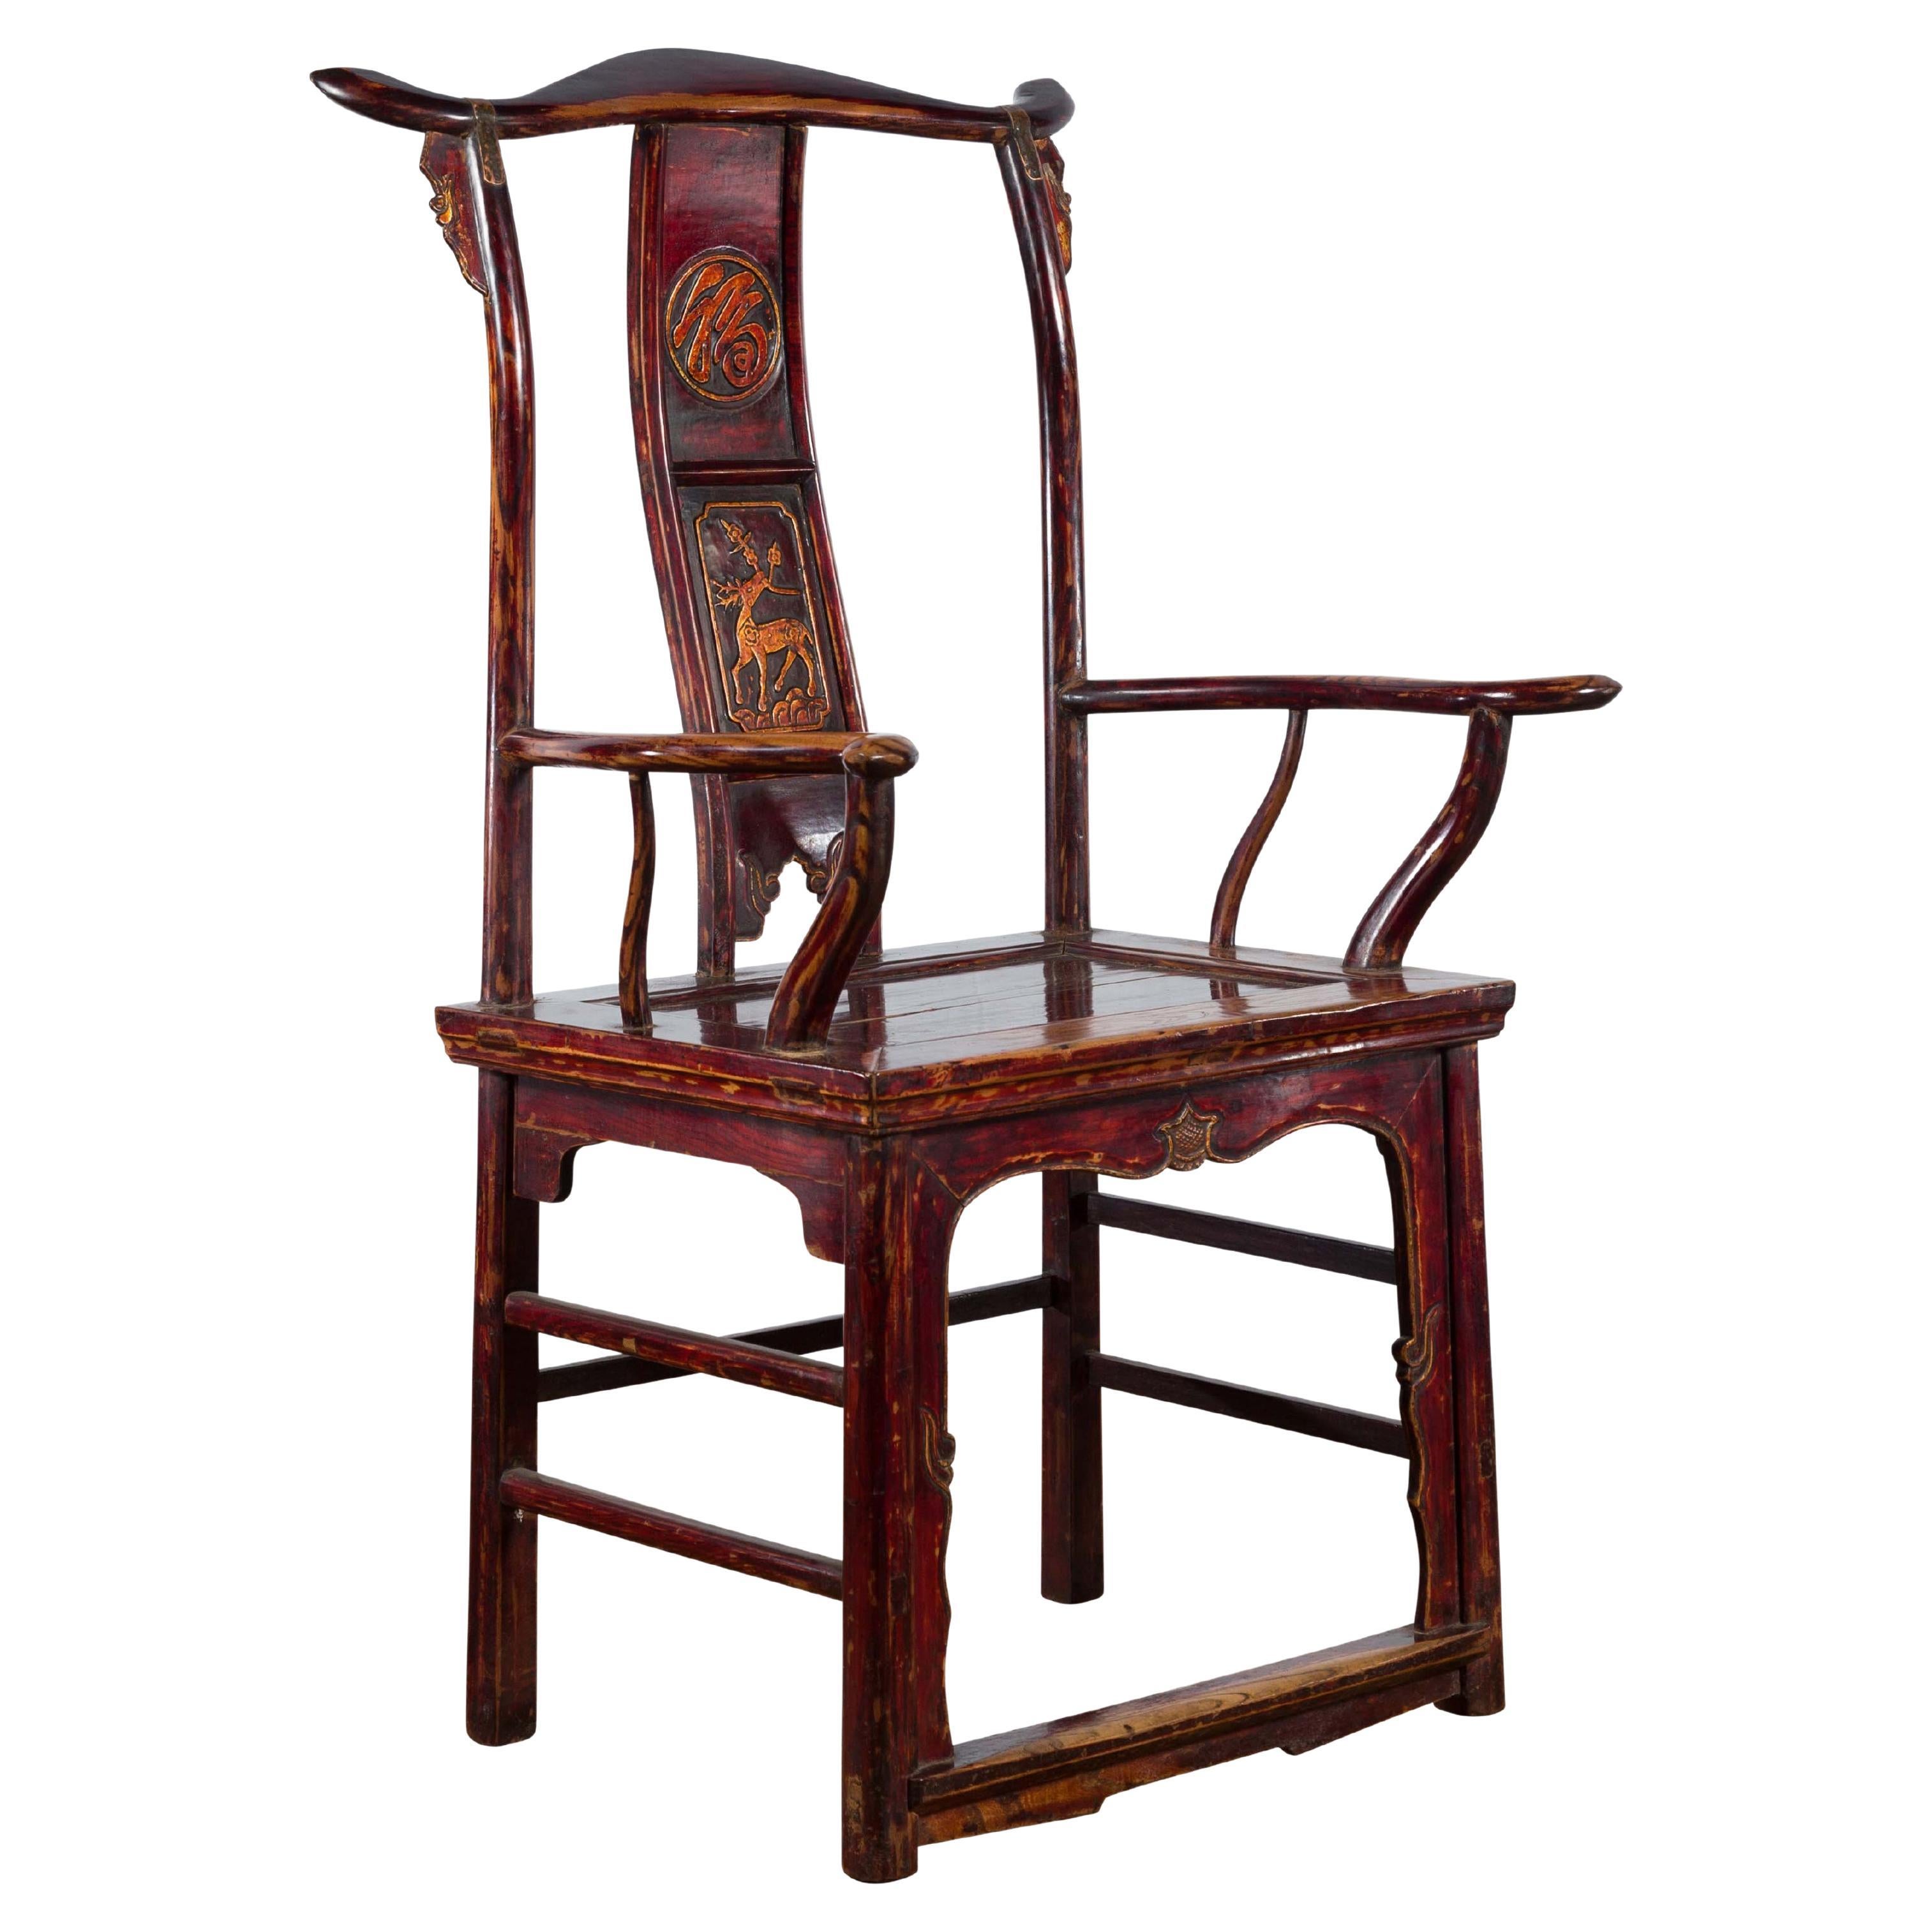 Chinese 19th Century Qing Dynasty Yoke Back Armchair with Carved Medallions